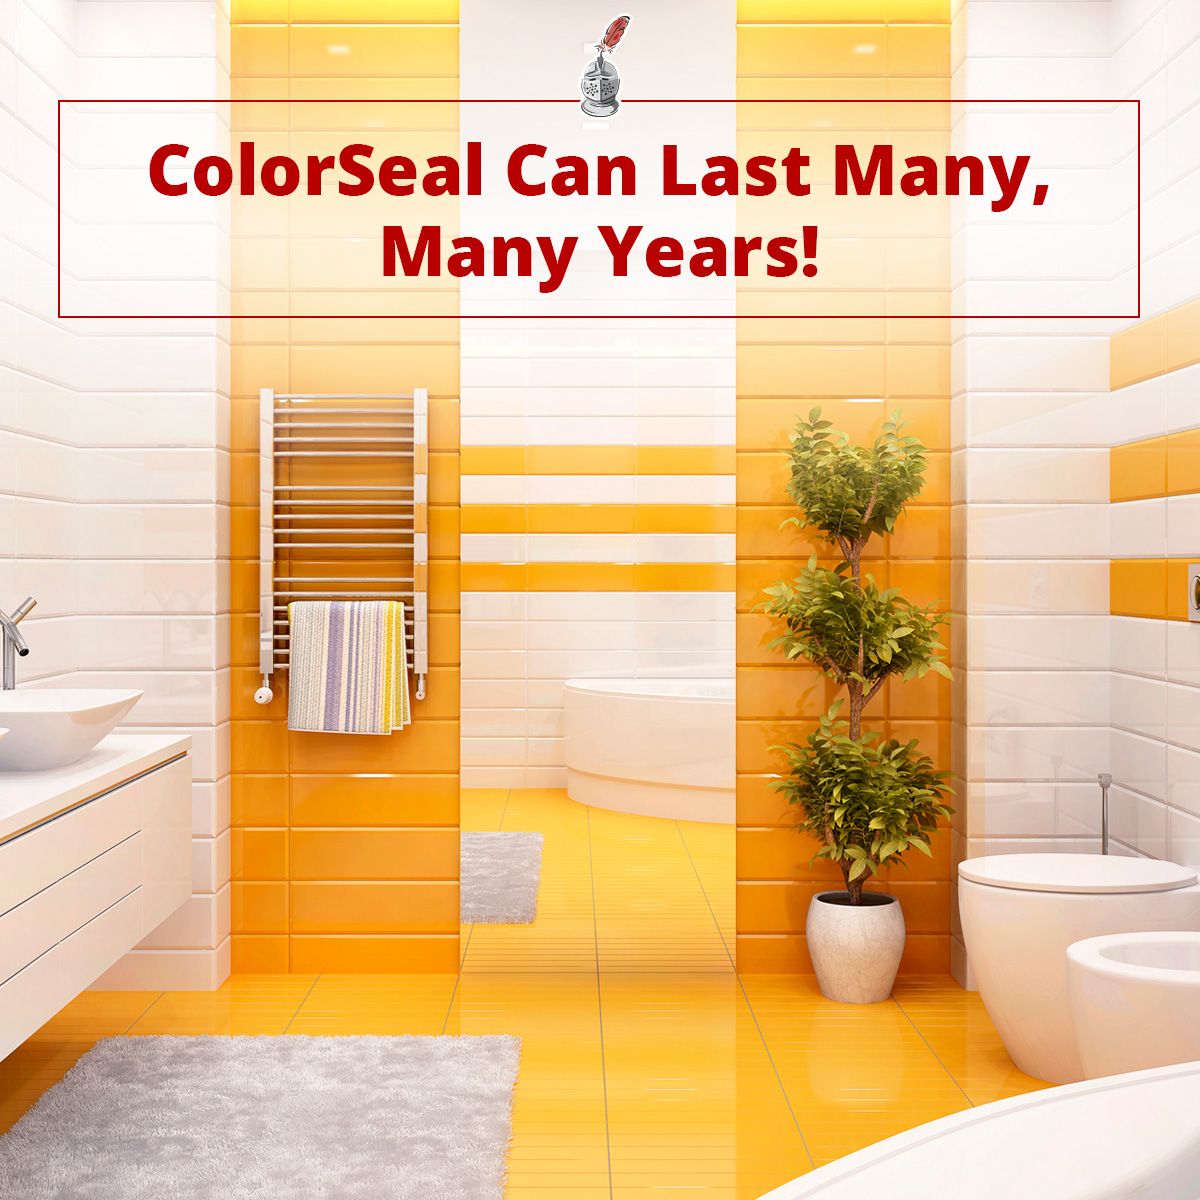 ColorSeal Can Last Many, Many Years!